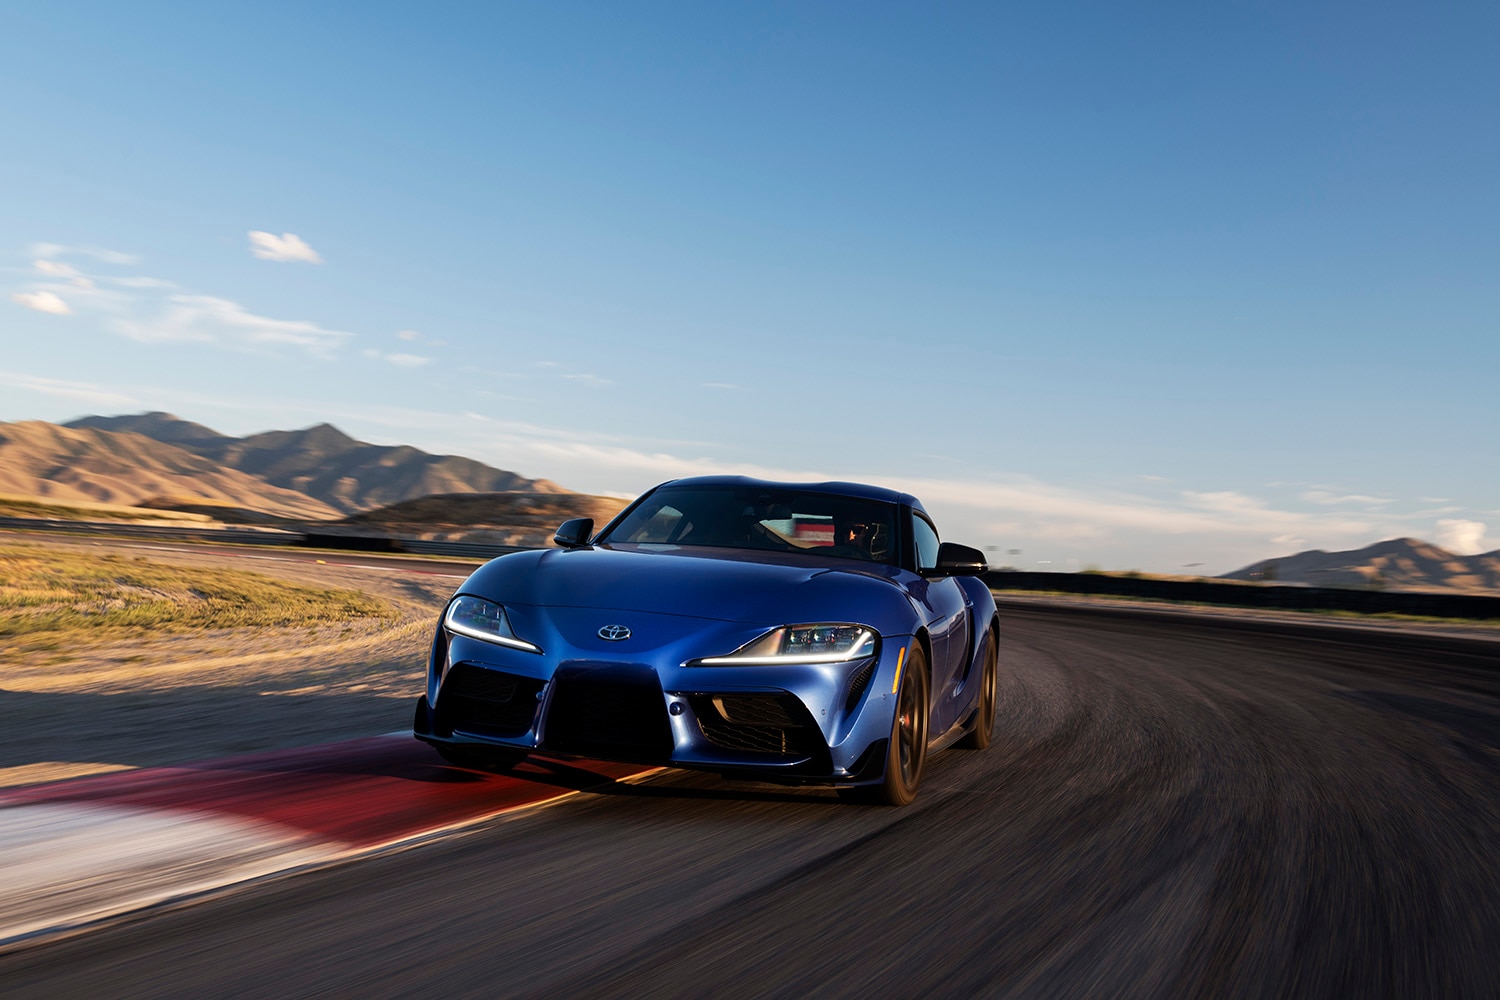 2023 Toyota GR Supra 3.0 Premium in Stratosphere blue hugging the inside curb of a desert racetrack's long sweeper